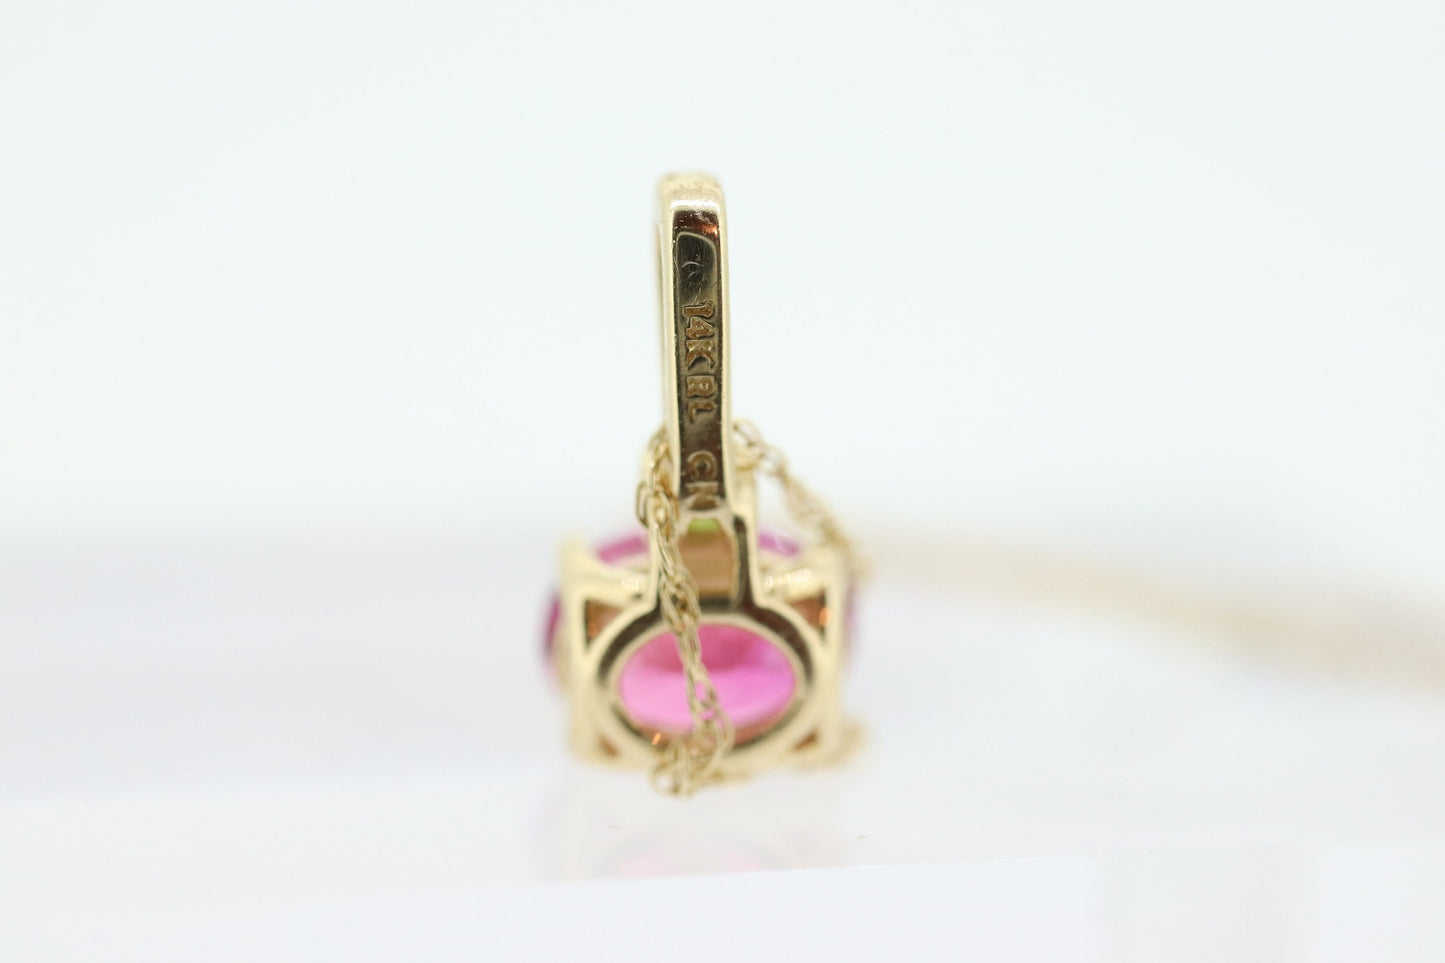 14k Tourmaline Solitaire Pendant. 14k Pink and Green Tourmaline Pendant. Pink Tourmaline necklace st(178)